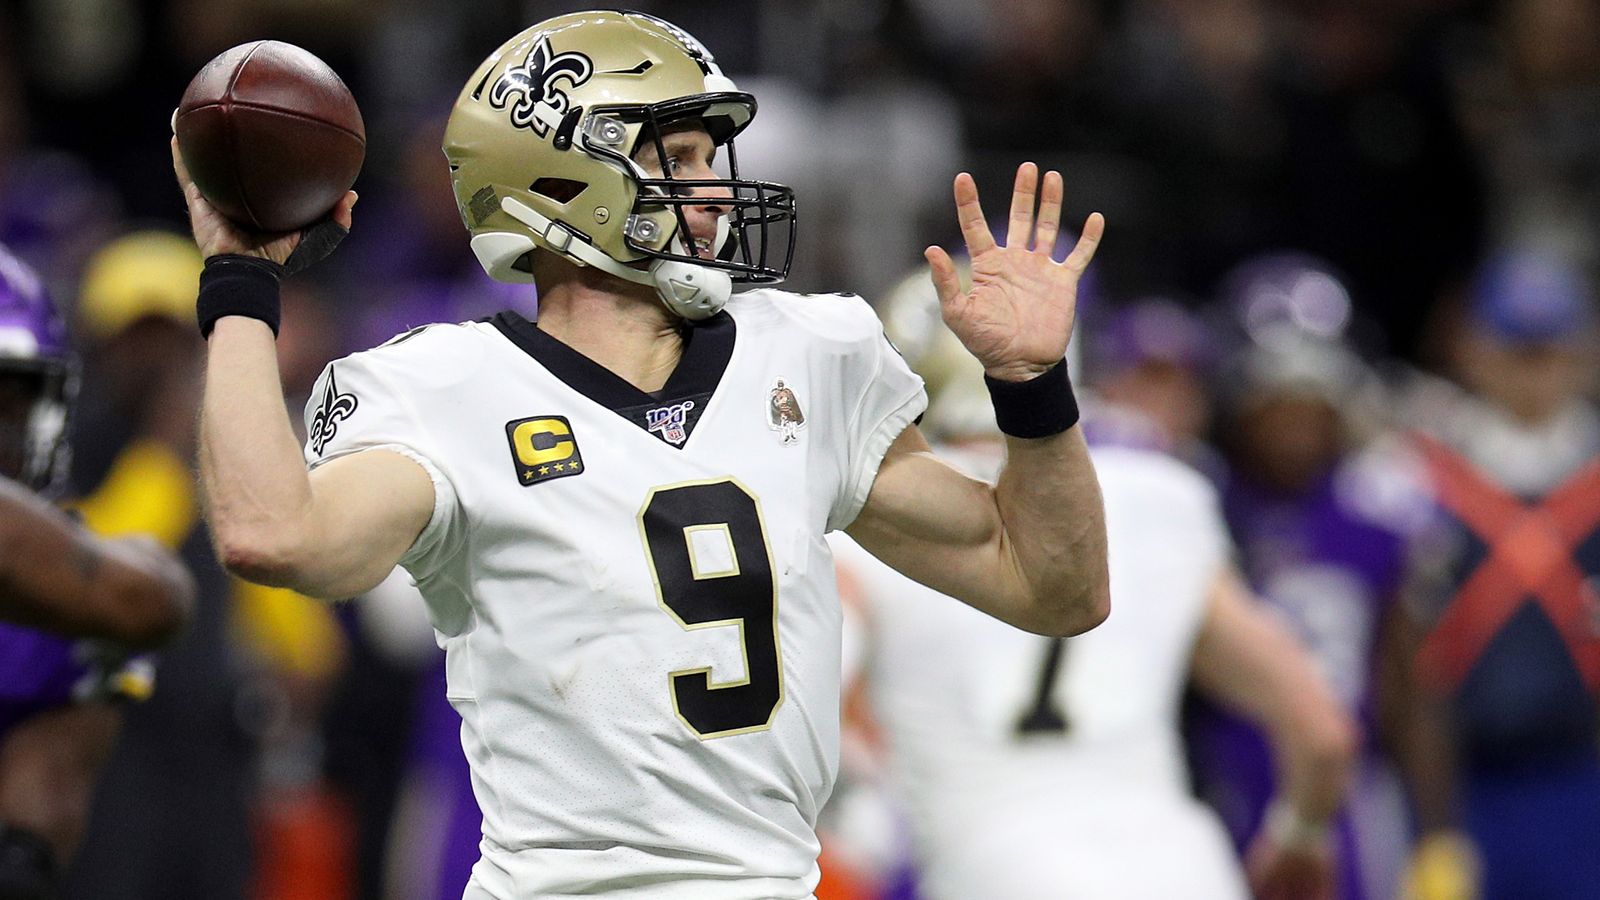 Drew Brees confirms intention to come back to New Orleans Saints for